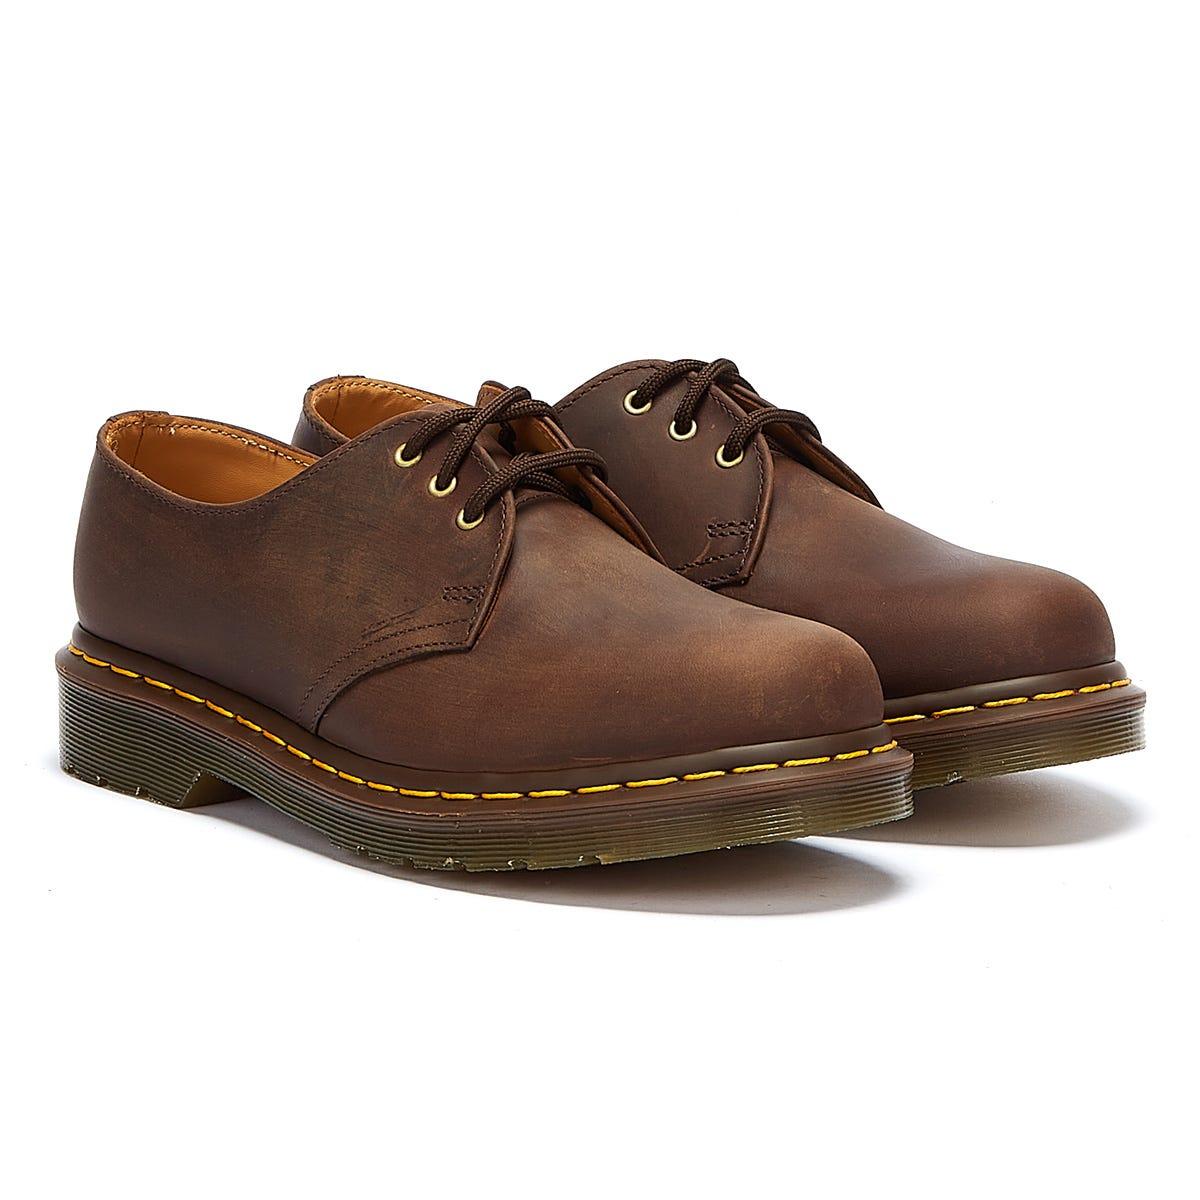 Dr. Martens Dr. Martens 1461 Crazy Horse Gaucho Leather Shoes in Brown -  Lyst